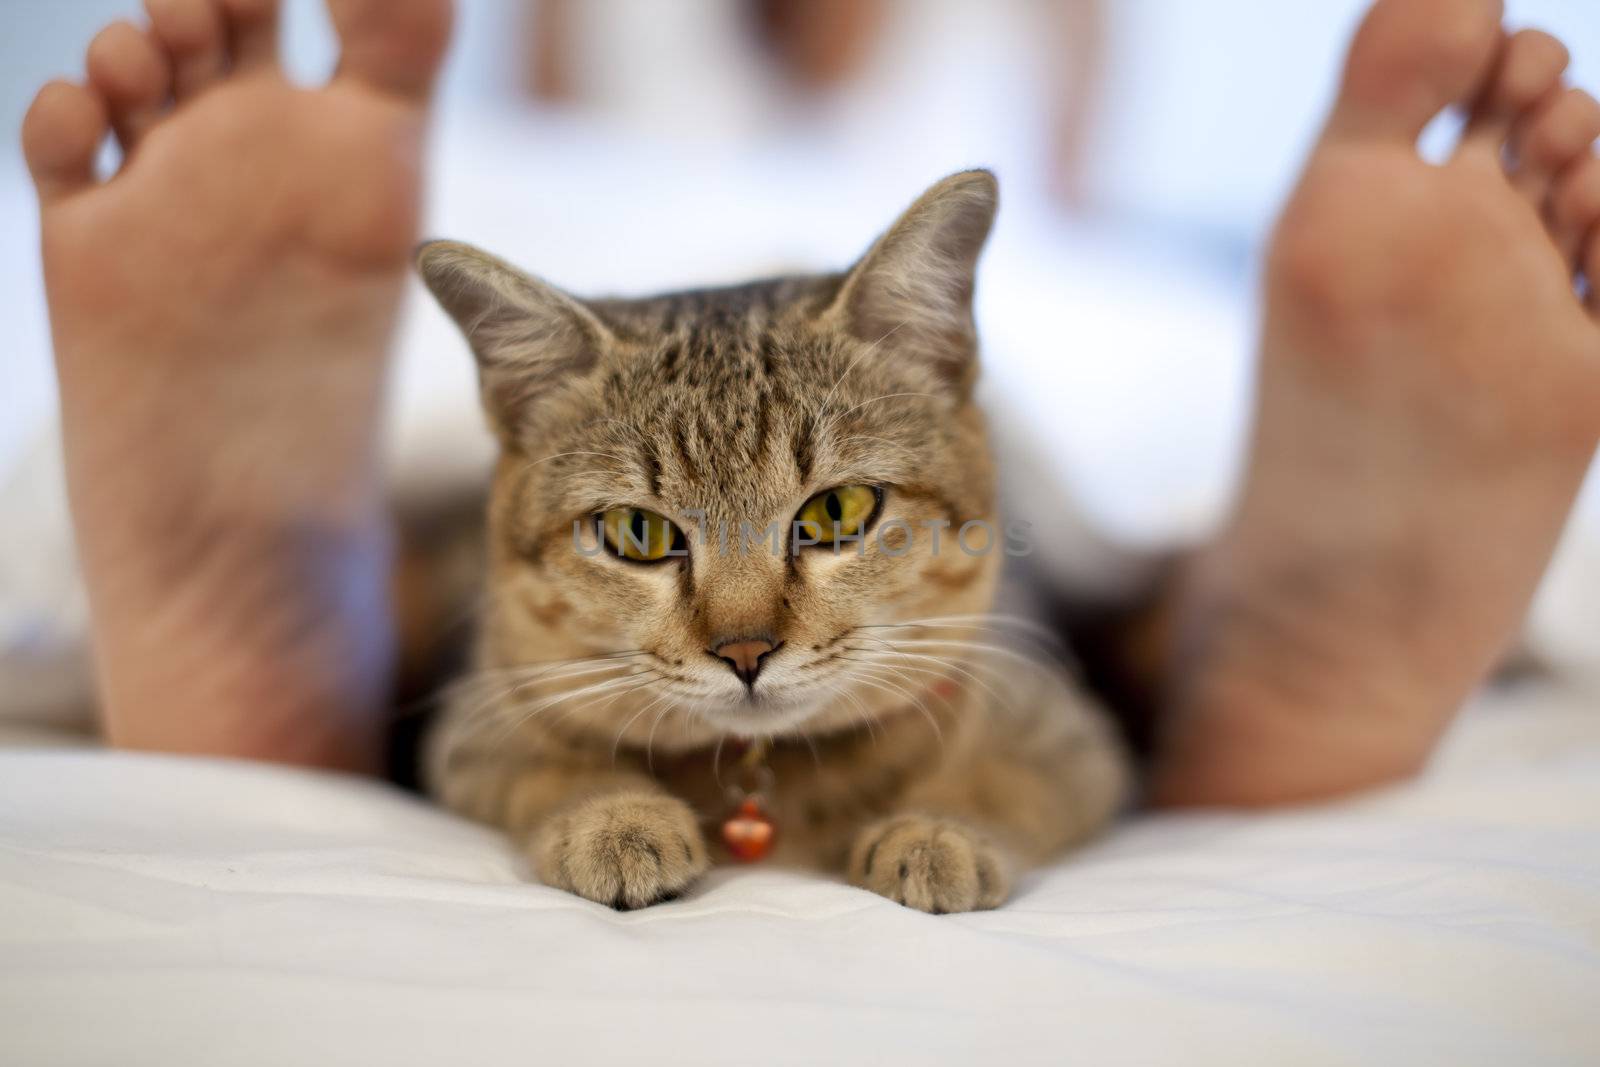 cat in bed with woman feet by tpfeller